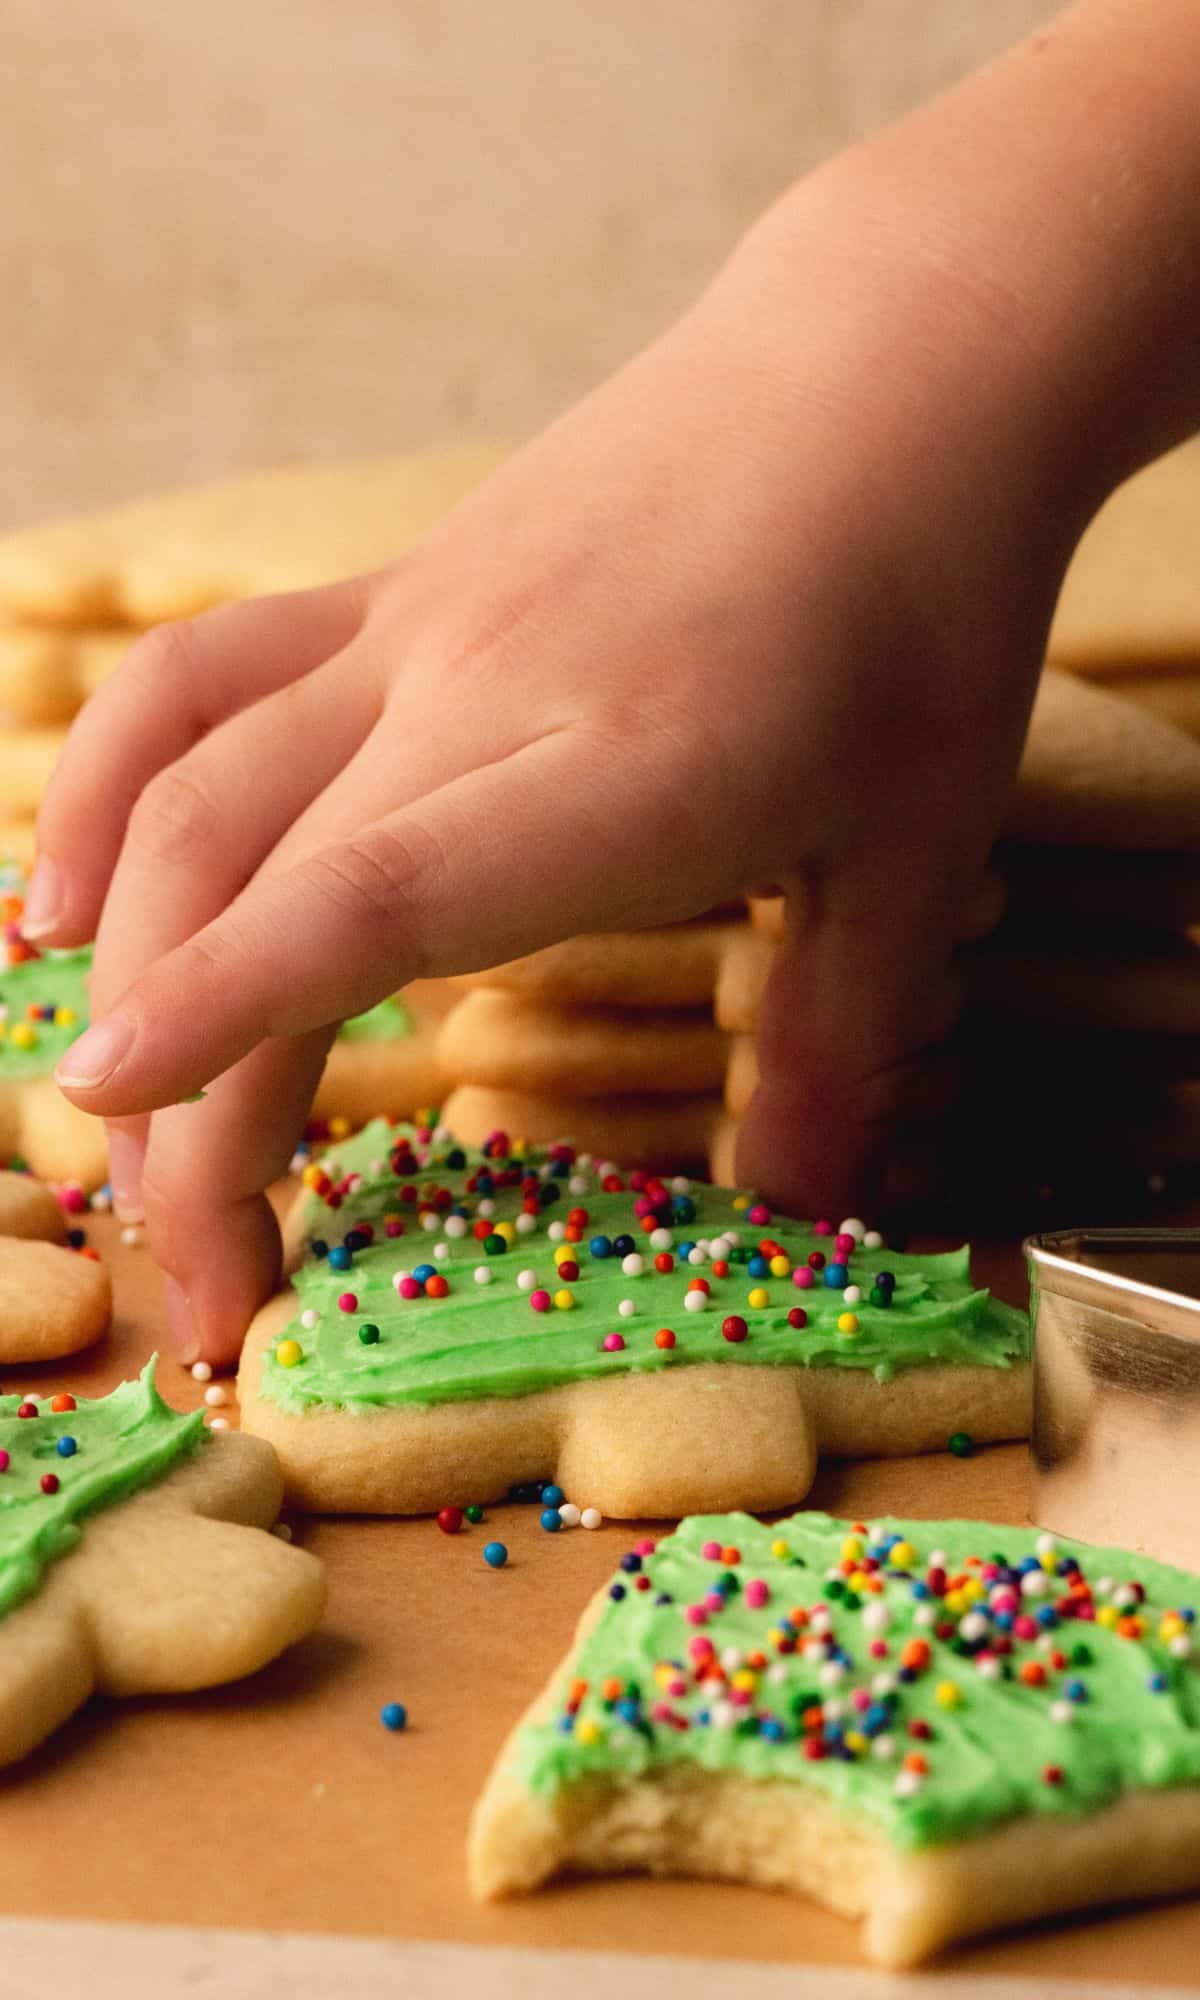 A hand grabbing a frosted frosted cookie.